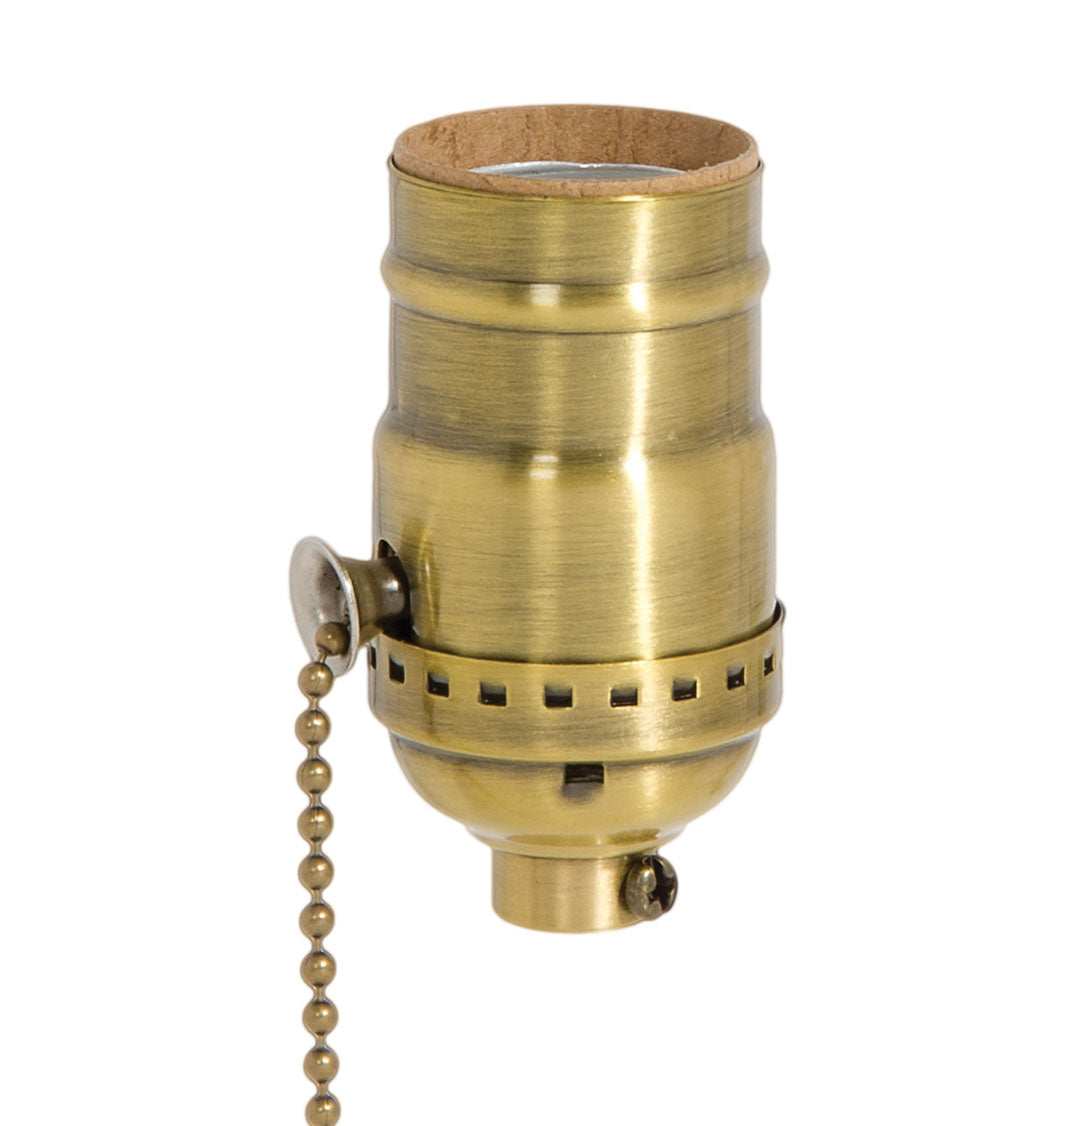 B&p Lamp Antique Brass On-Off Pull Chain Socket 48286A